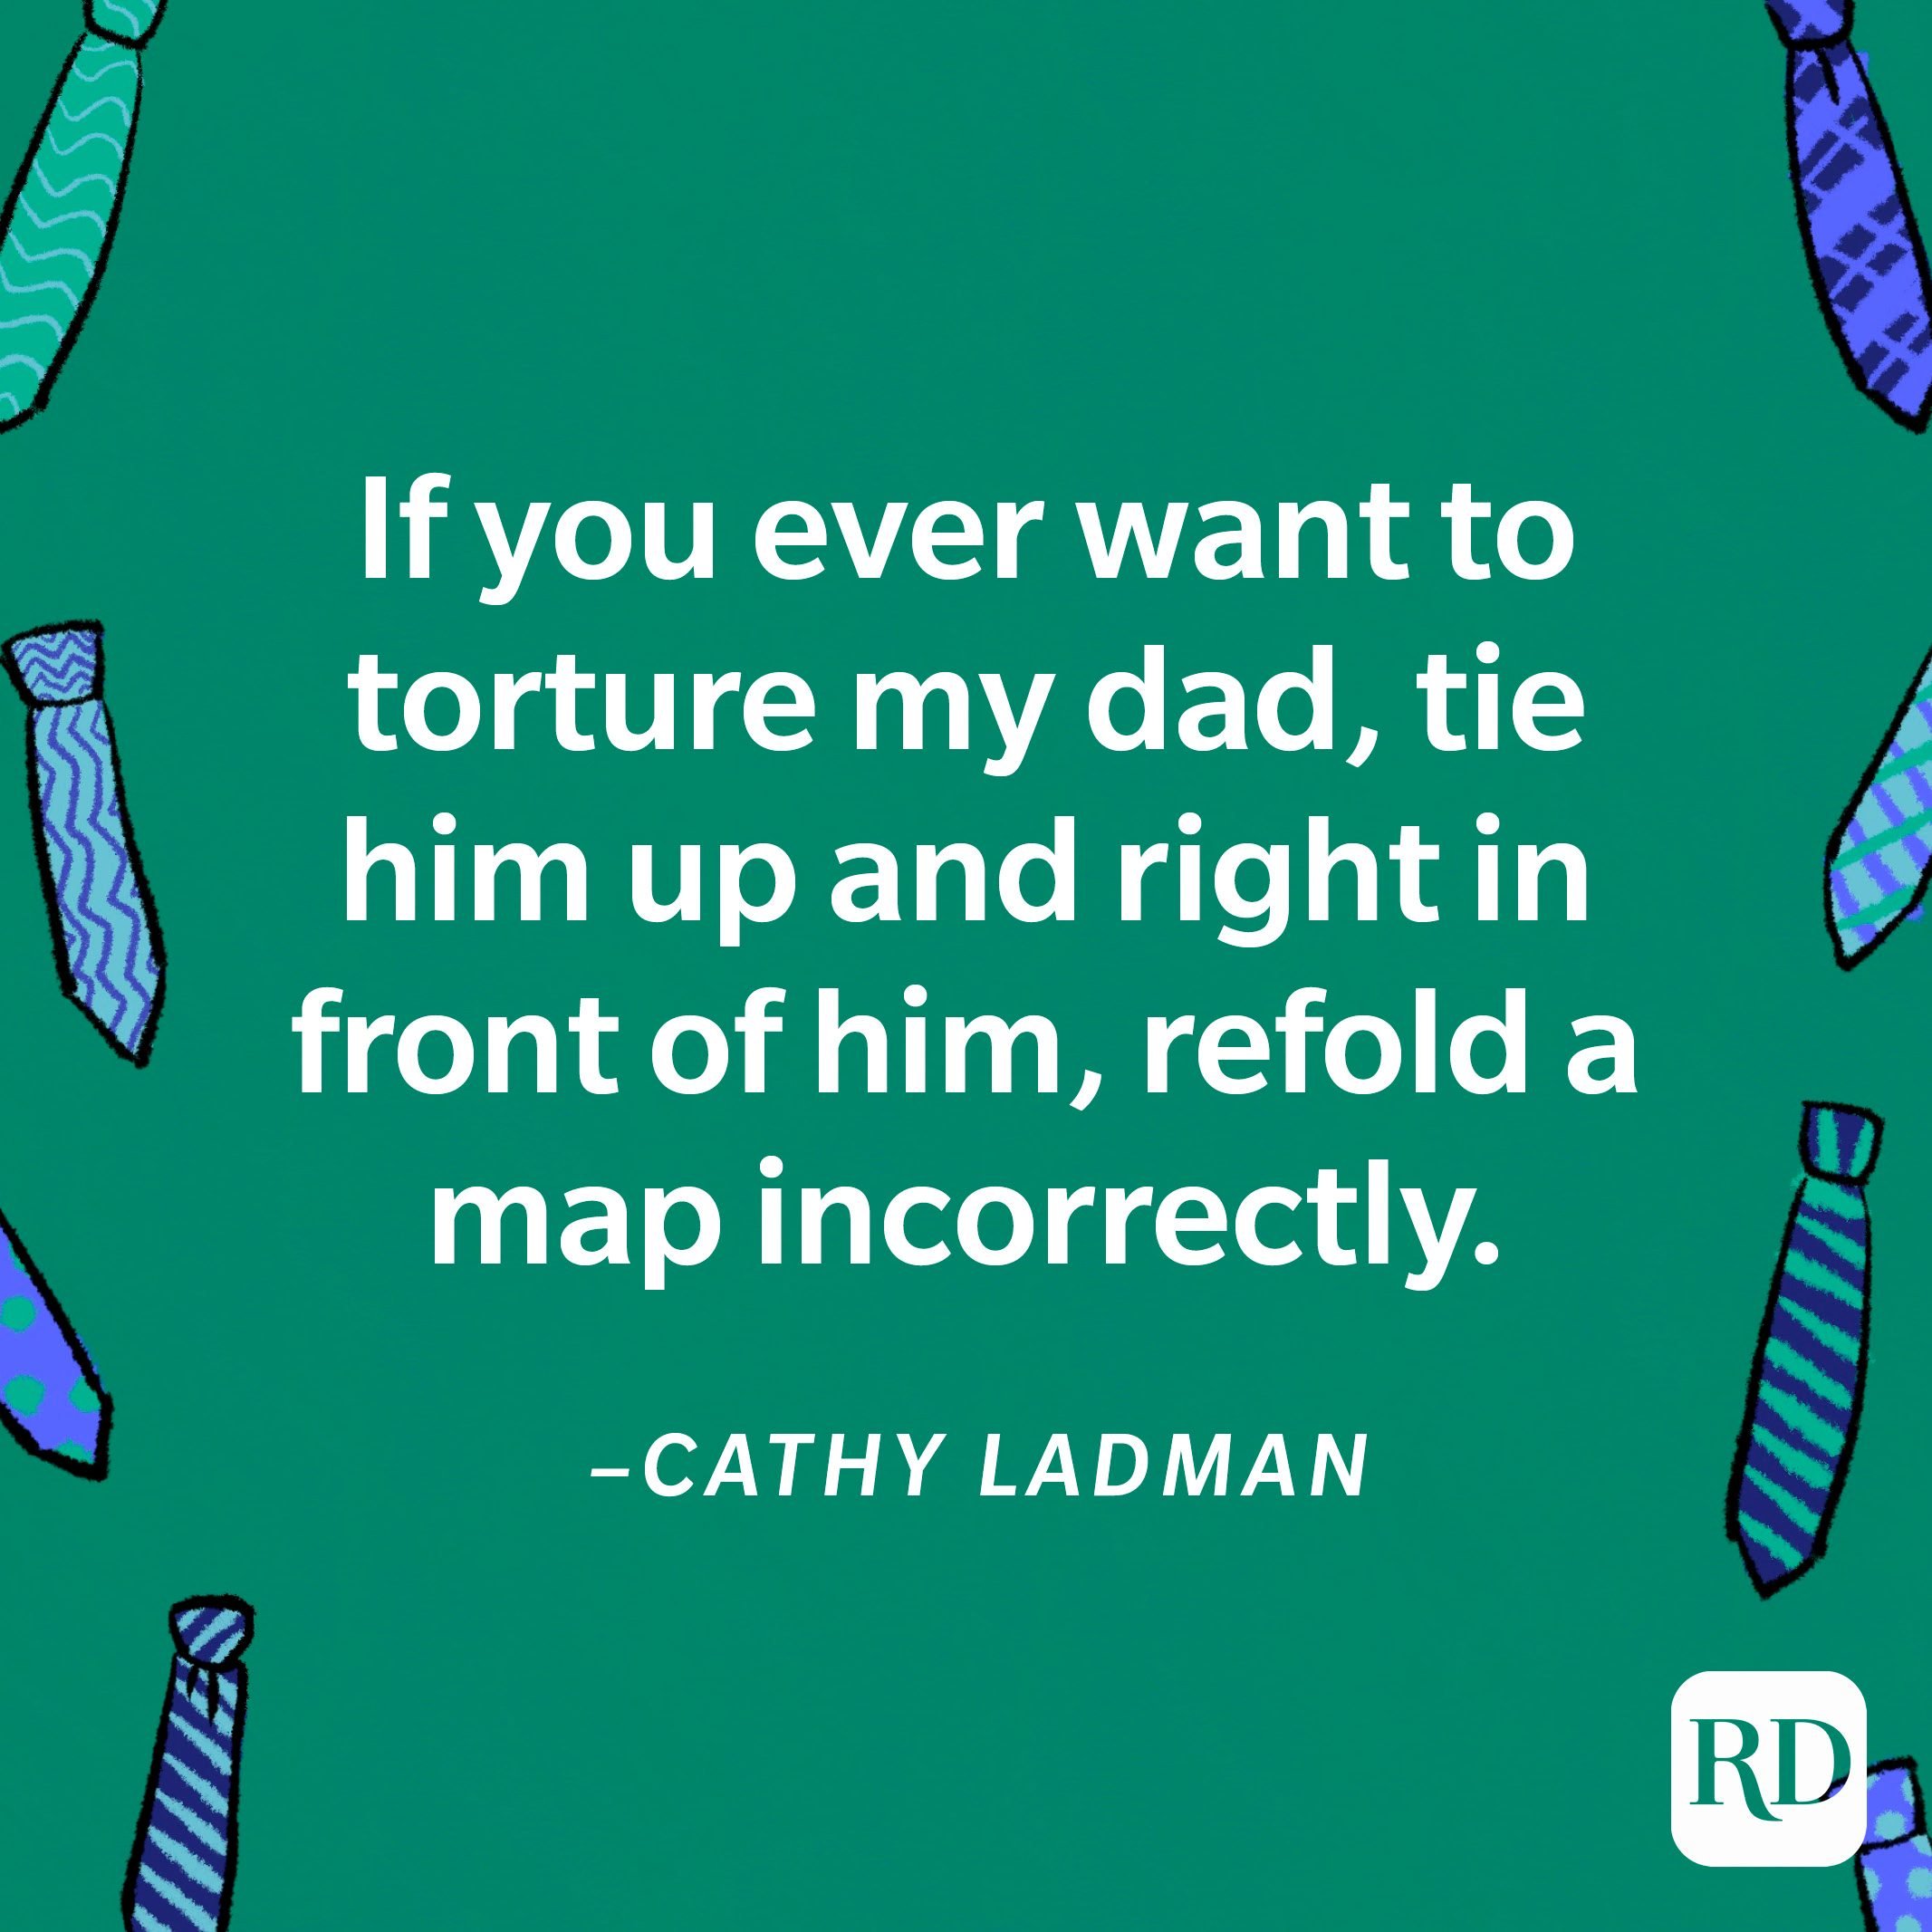 “If you ever want to torture my dad, tie him up and right in front of him, refold a map incorrectly.”—Cathy Ladman 6